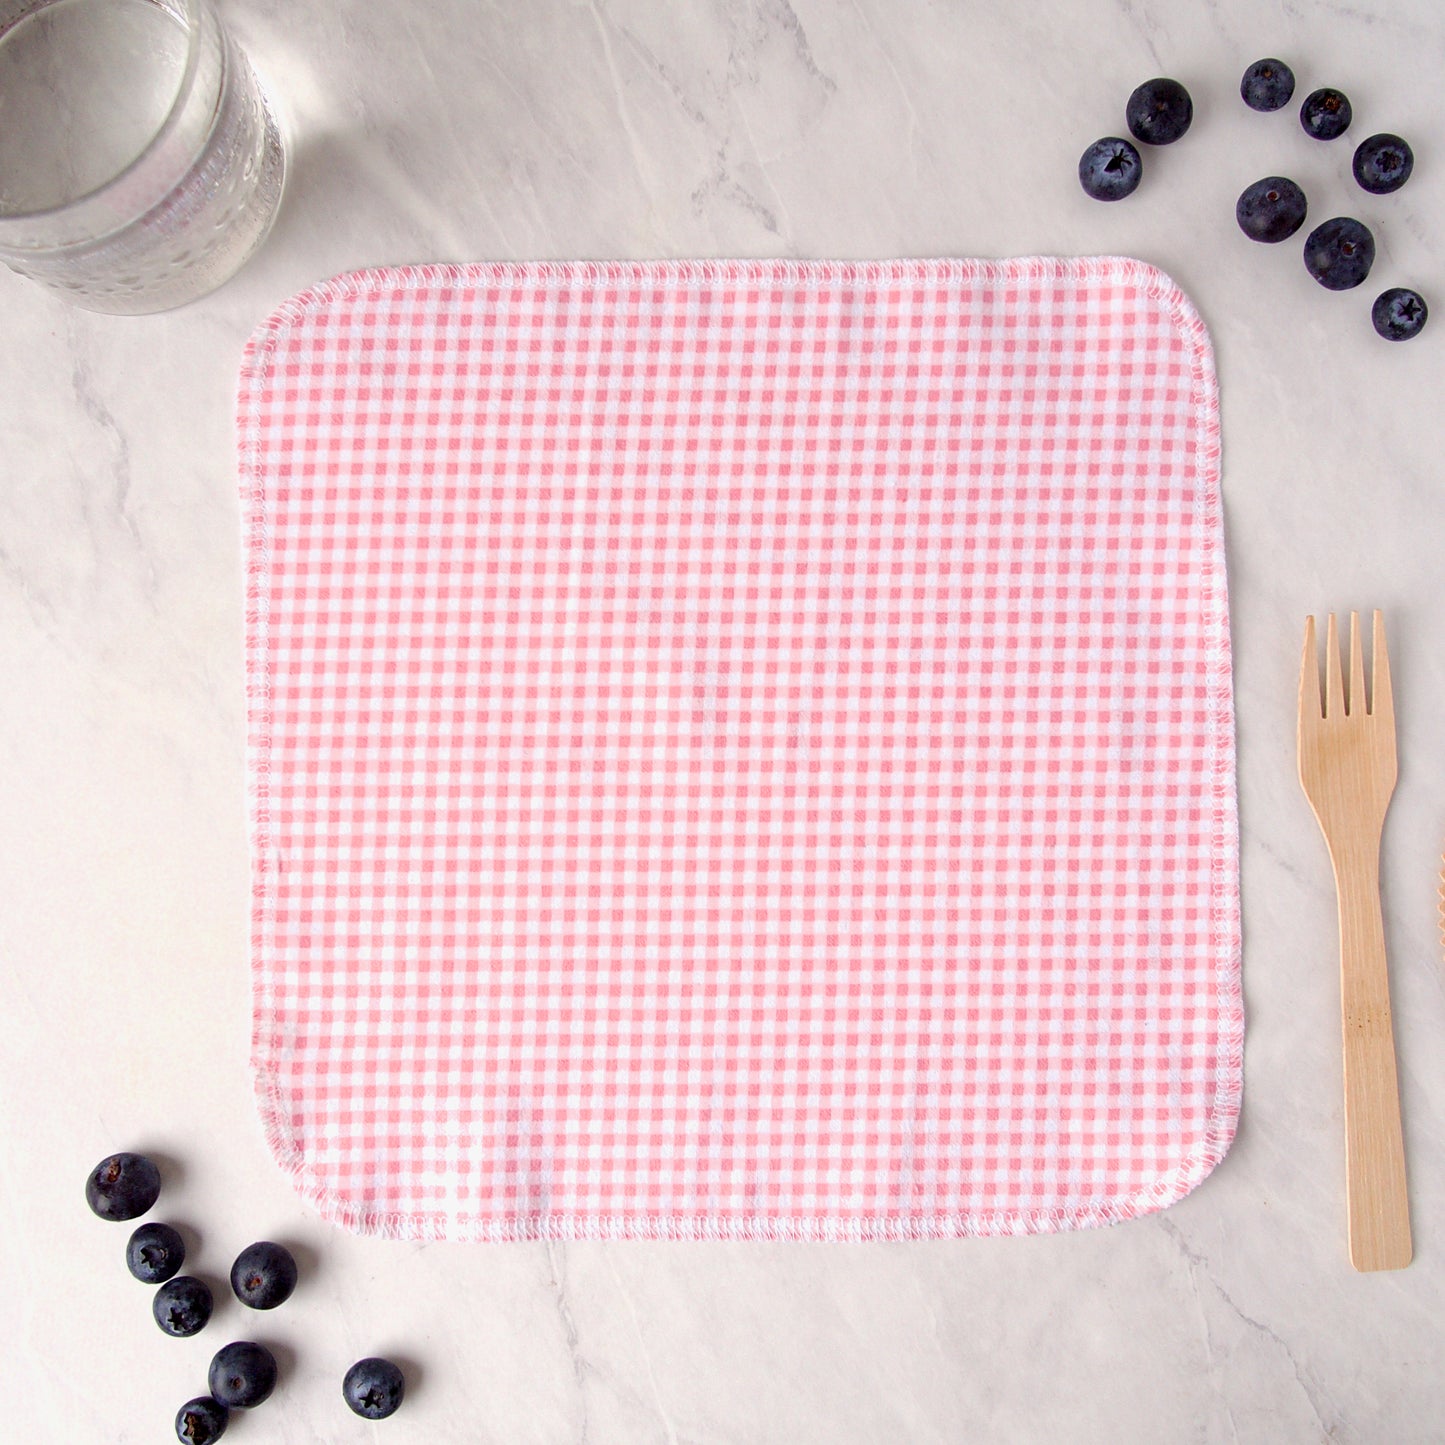 Reusable Cotton Napkins in Pink Gingham